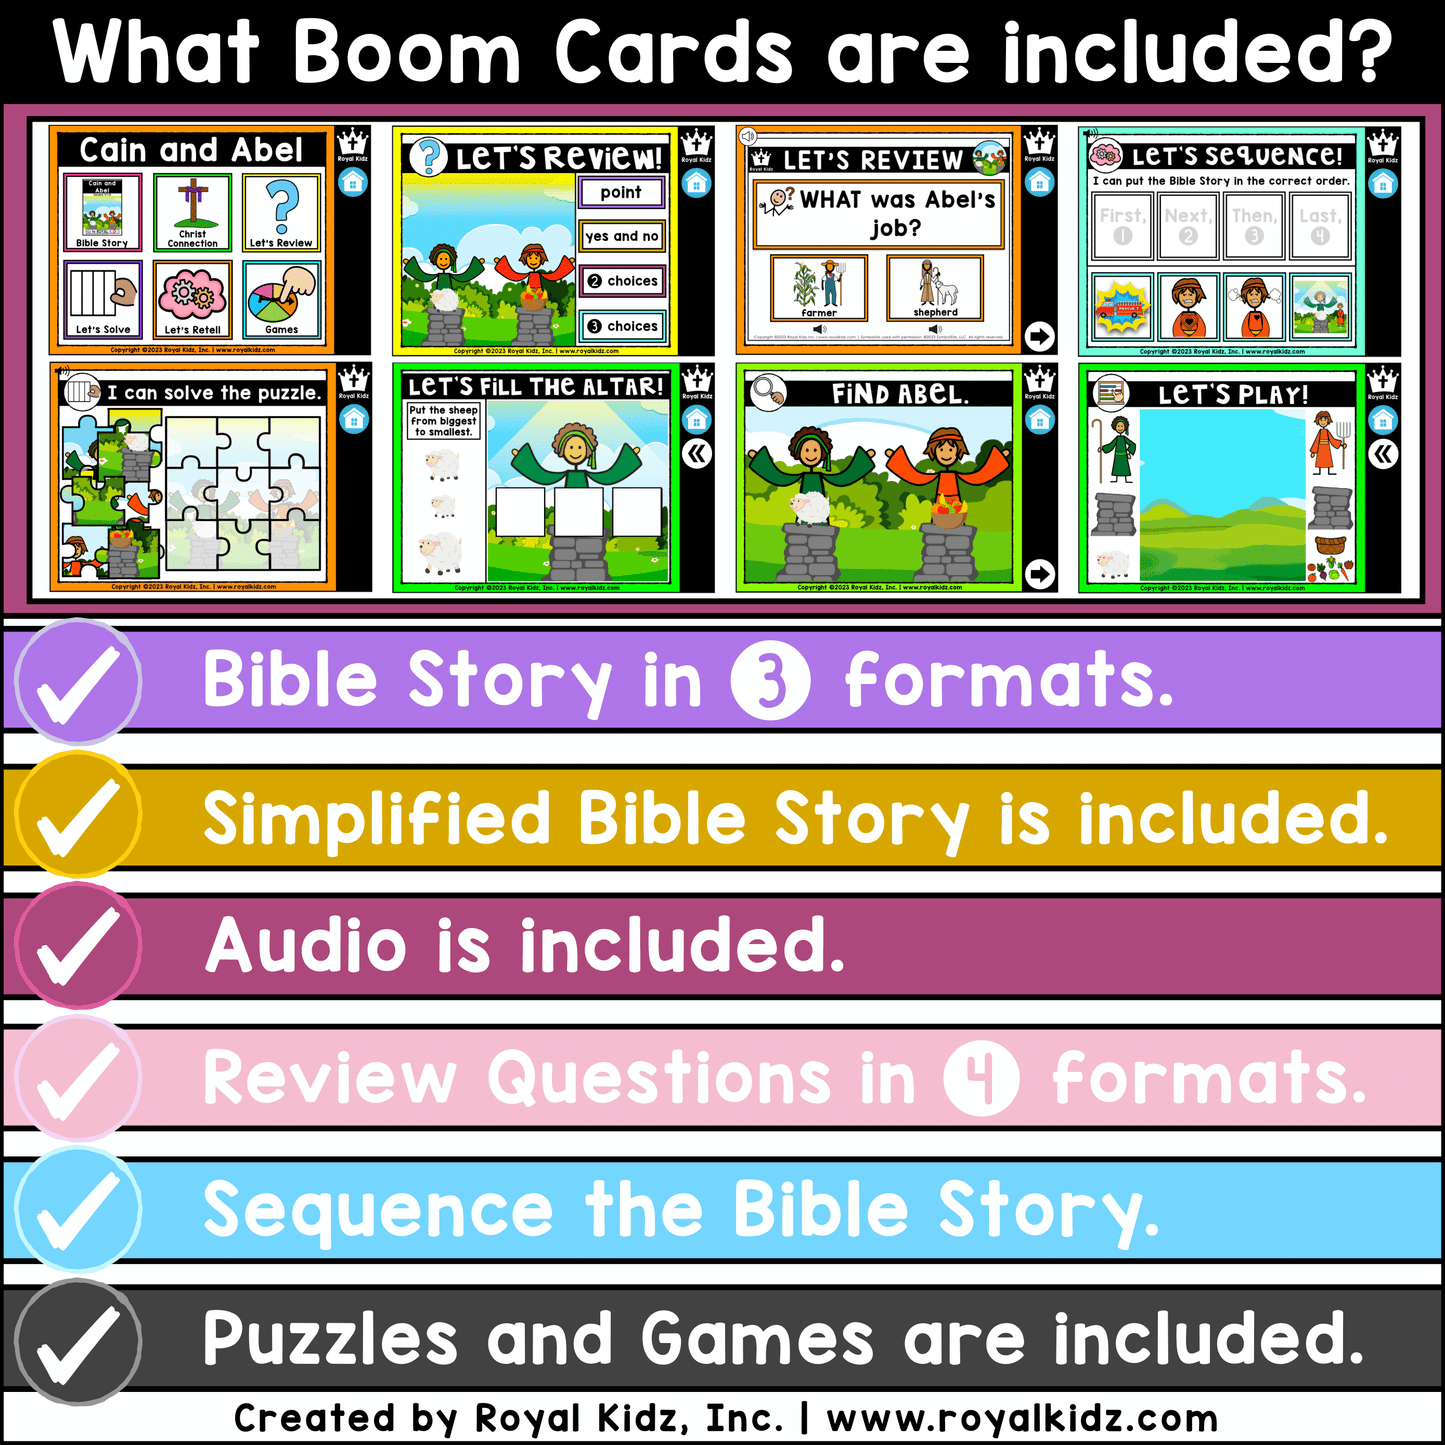 Bible Story Adapted Books WITH Symbol Supports + Bible Boom Cards™ SET 1 BUNDLE